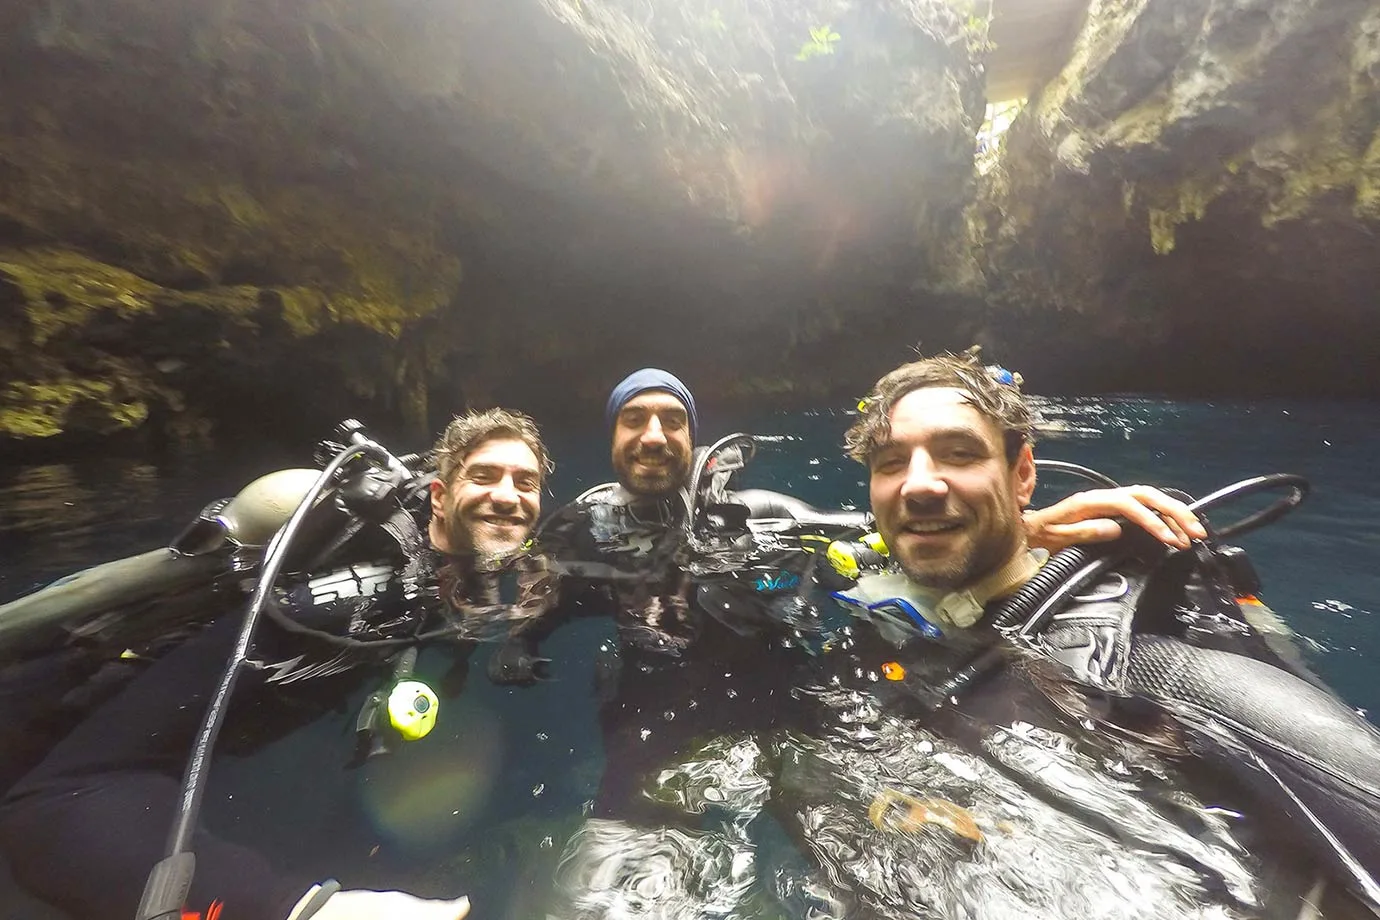 Diving the cenotes in Mexico